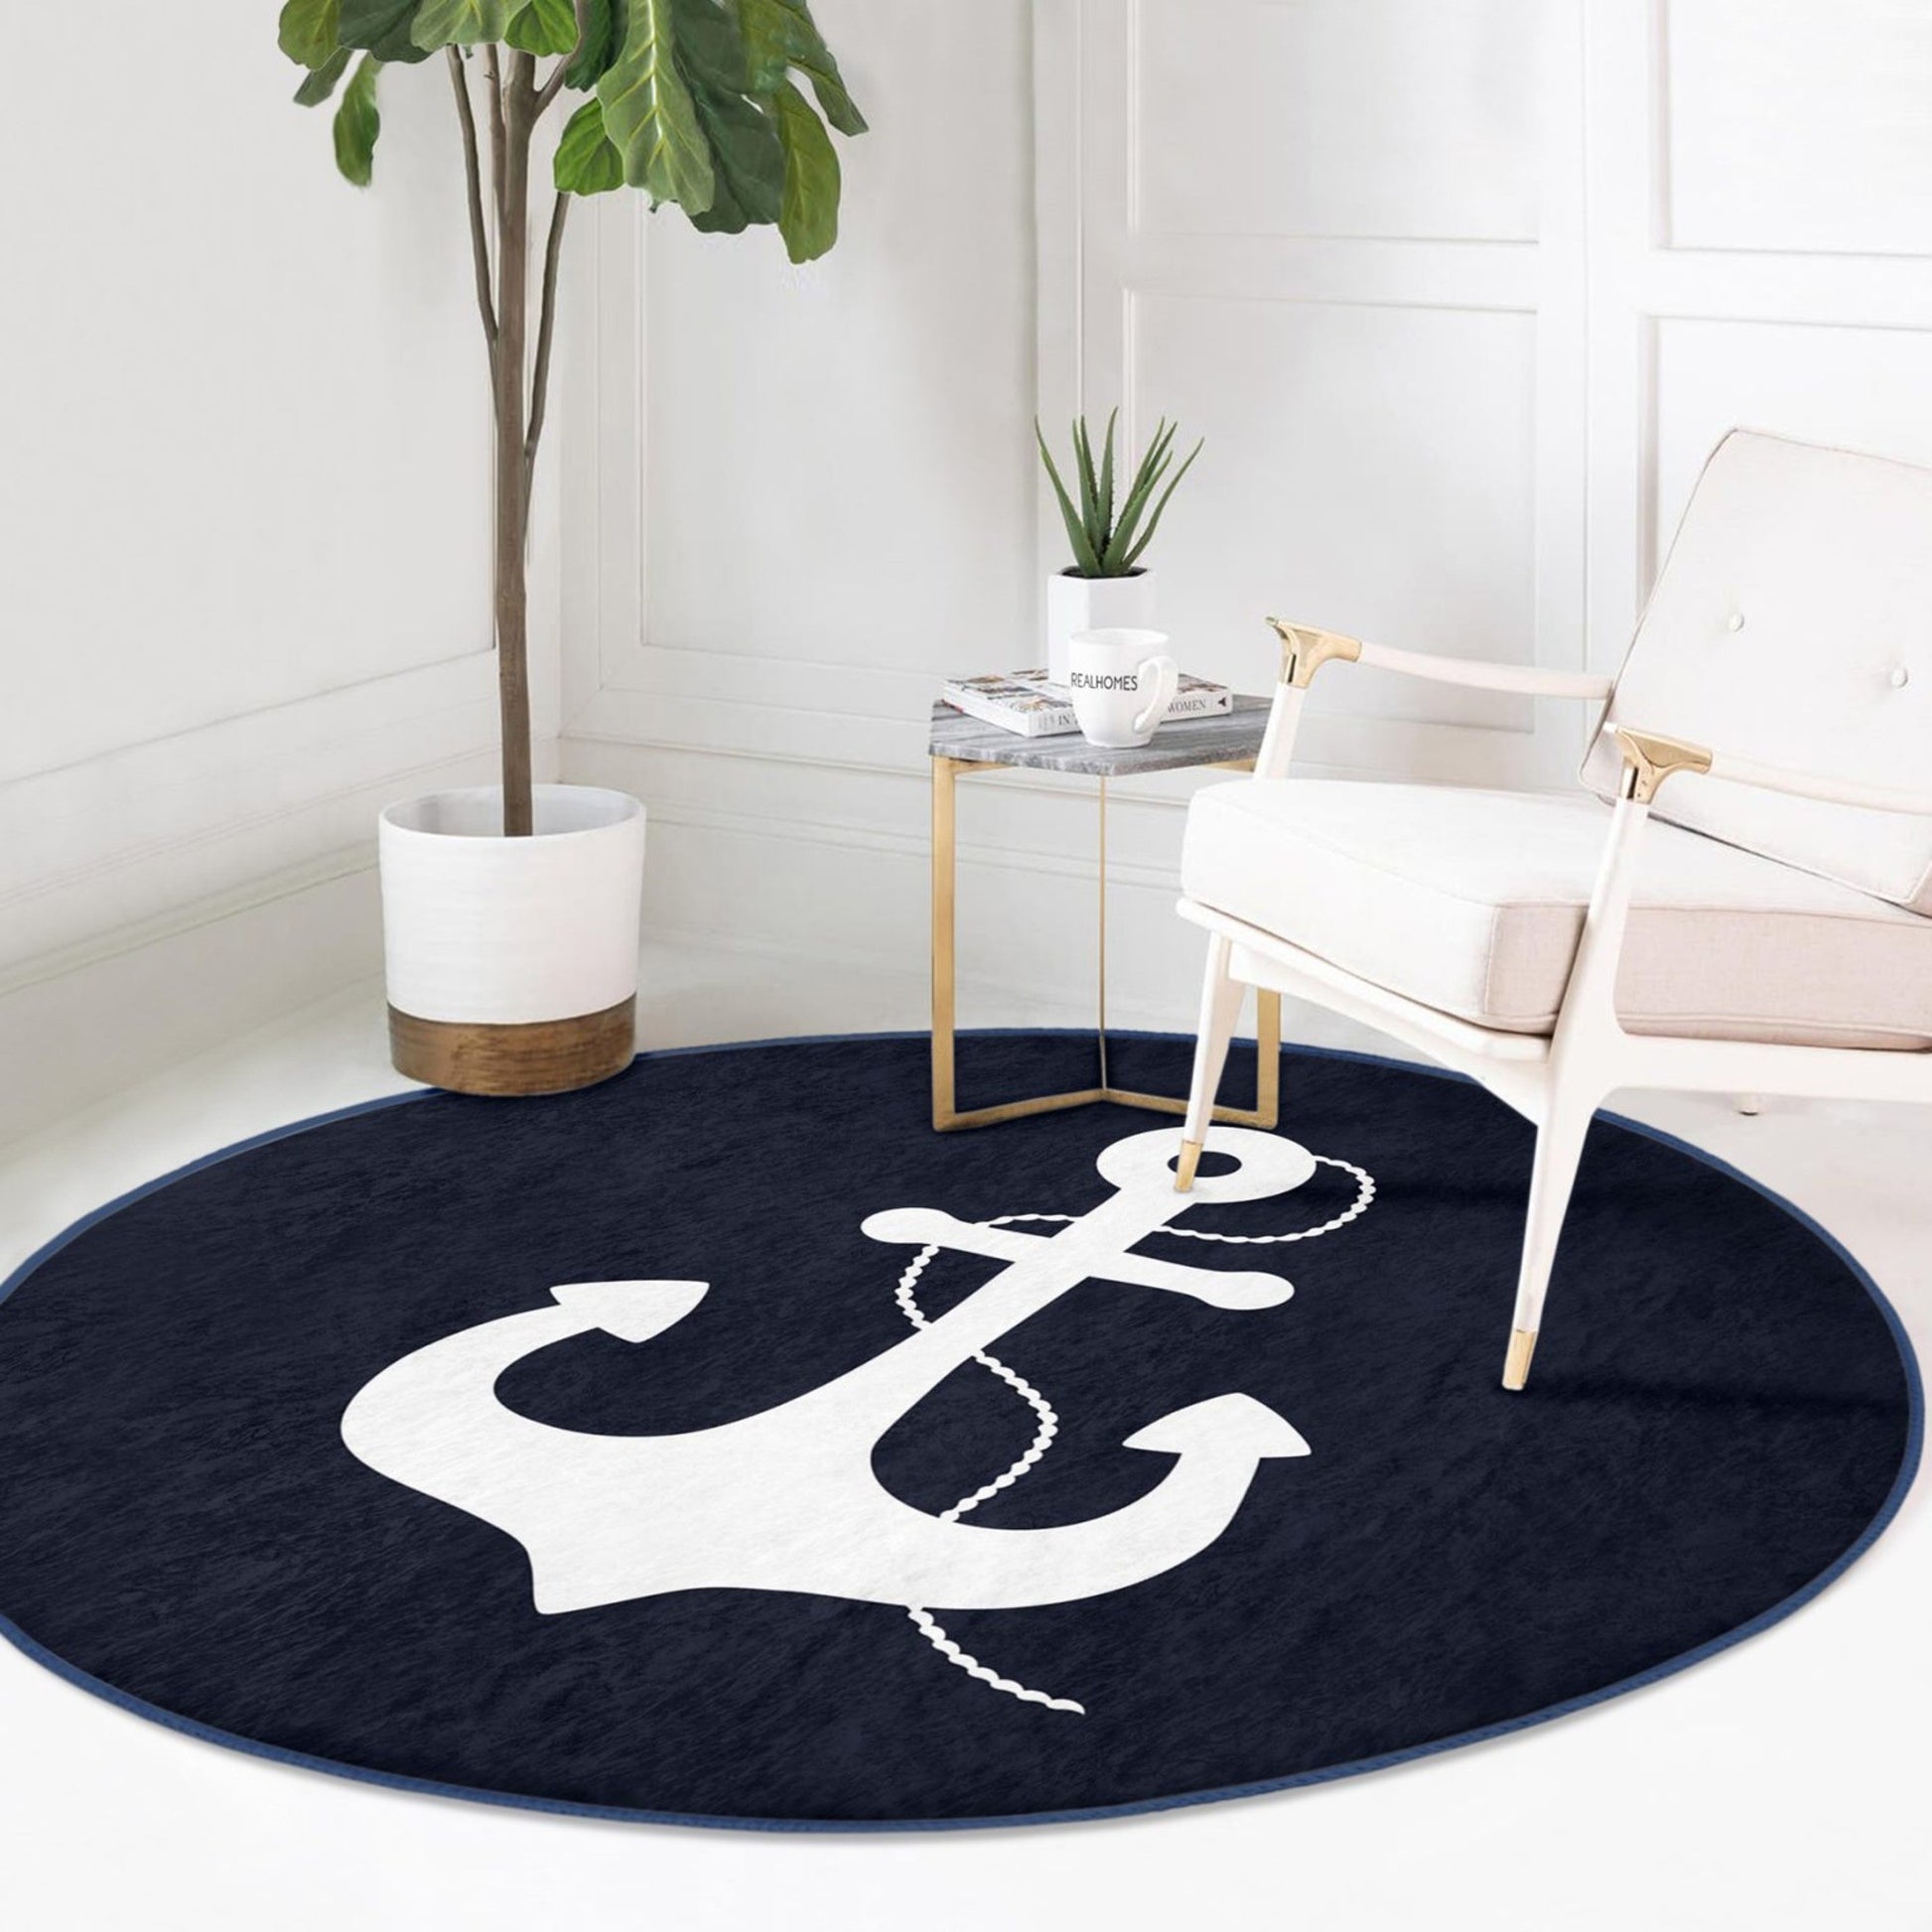 Round Patterned Floor Rug - Nautical Ambiance Accent